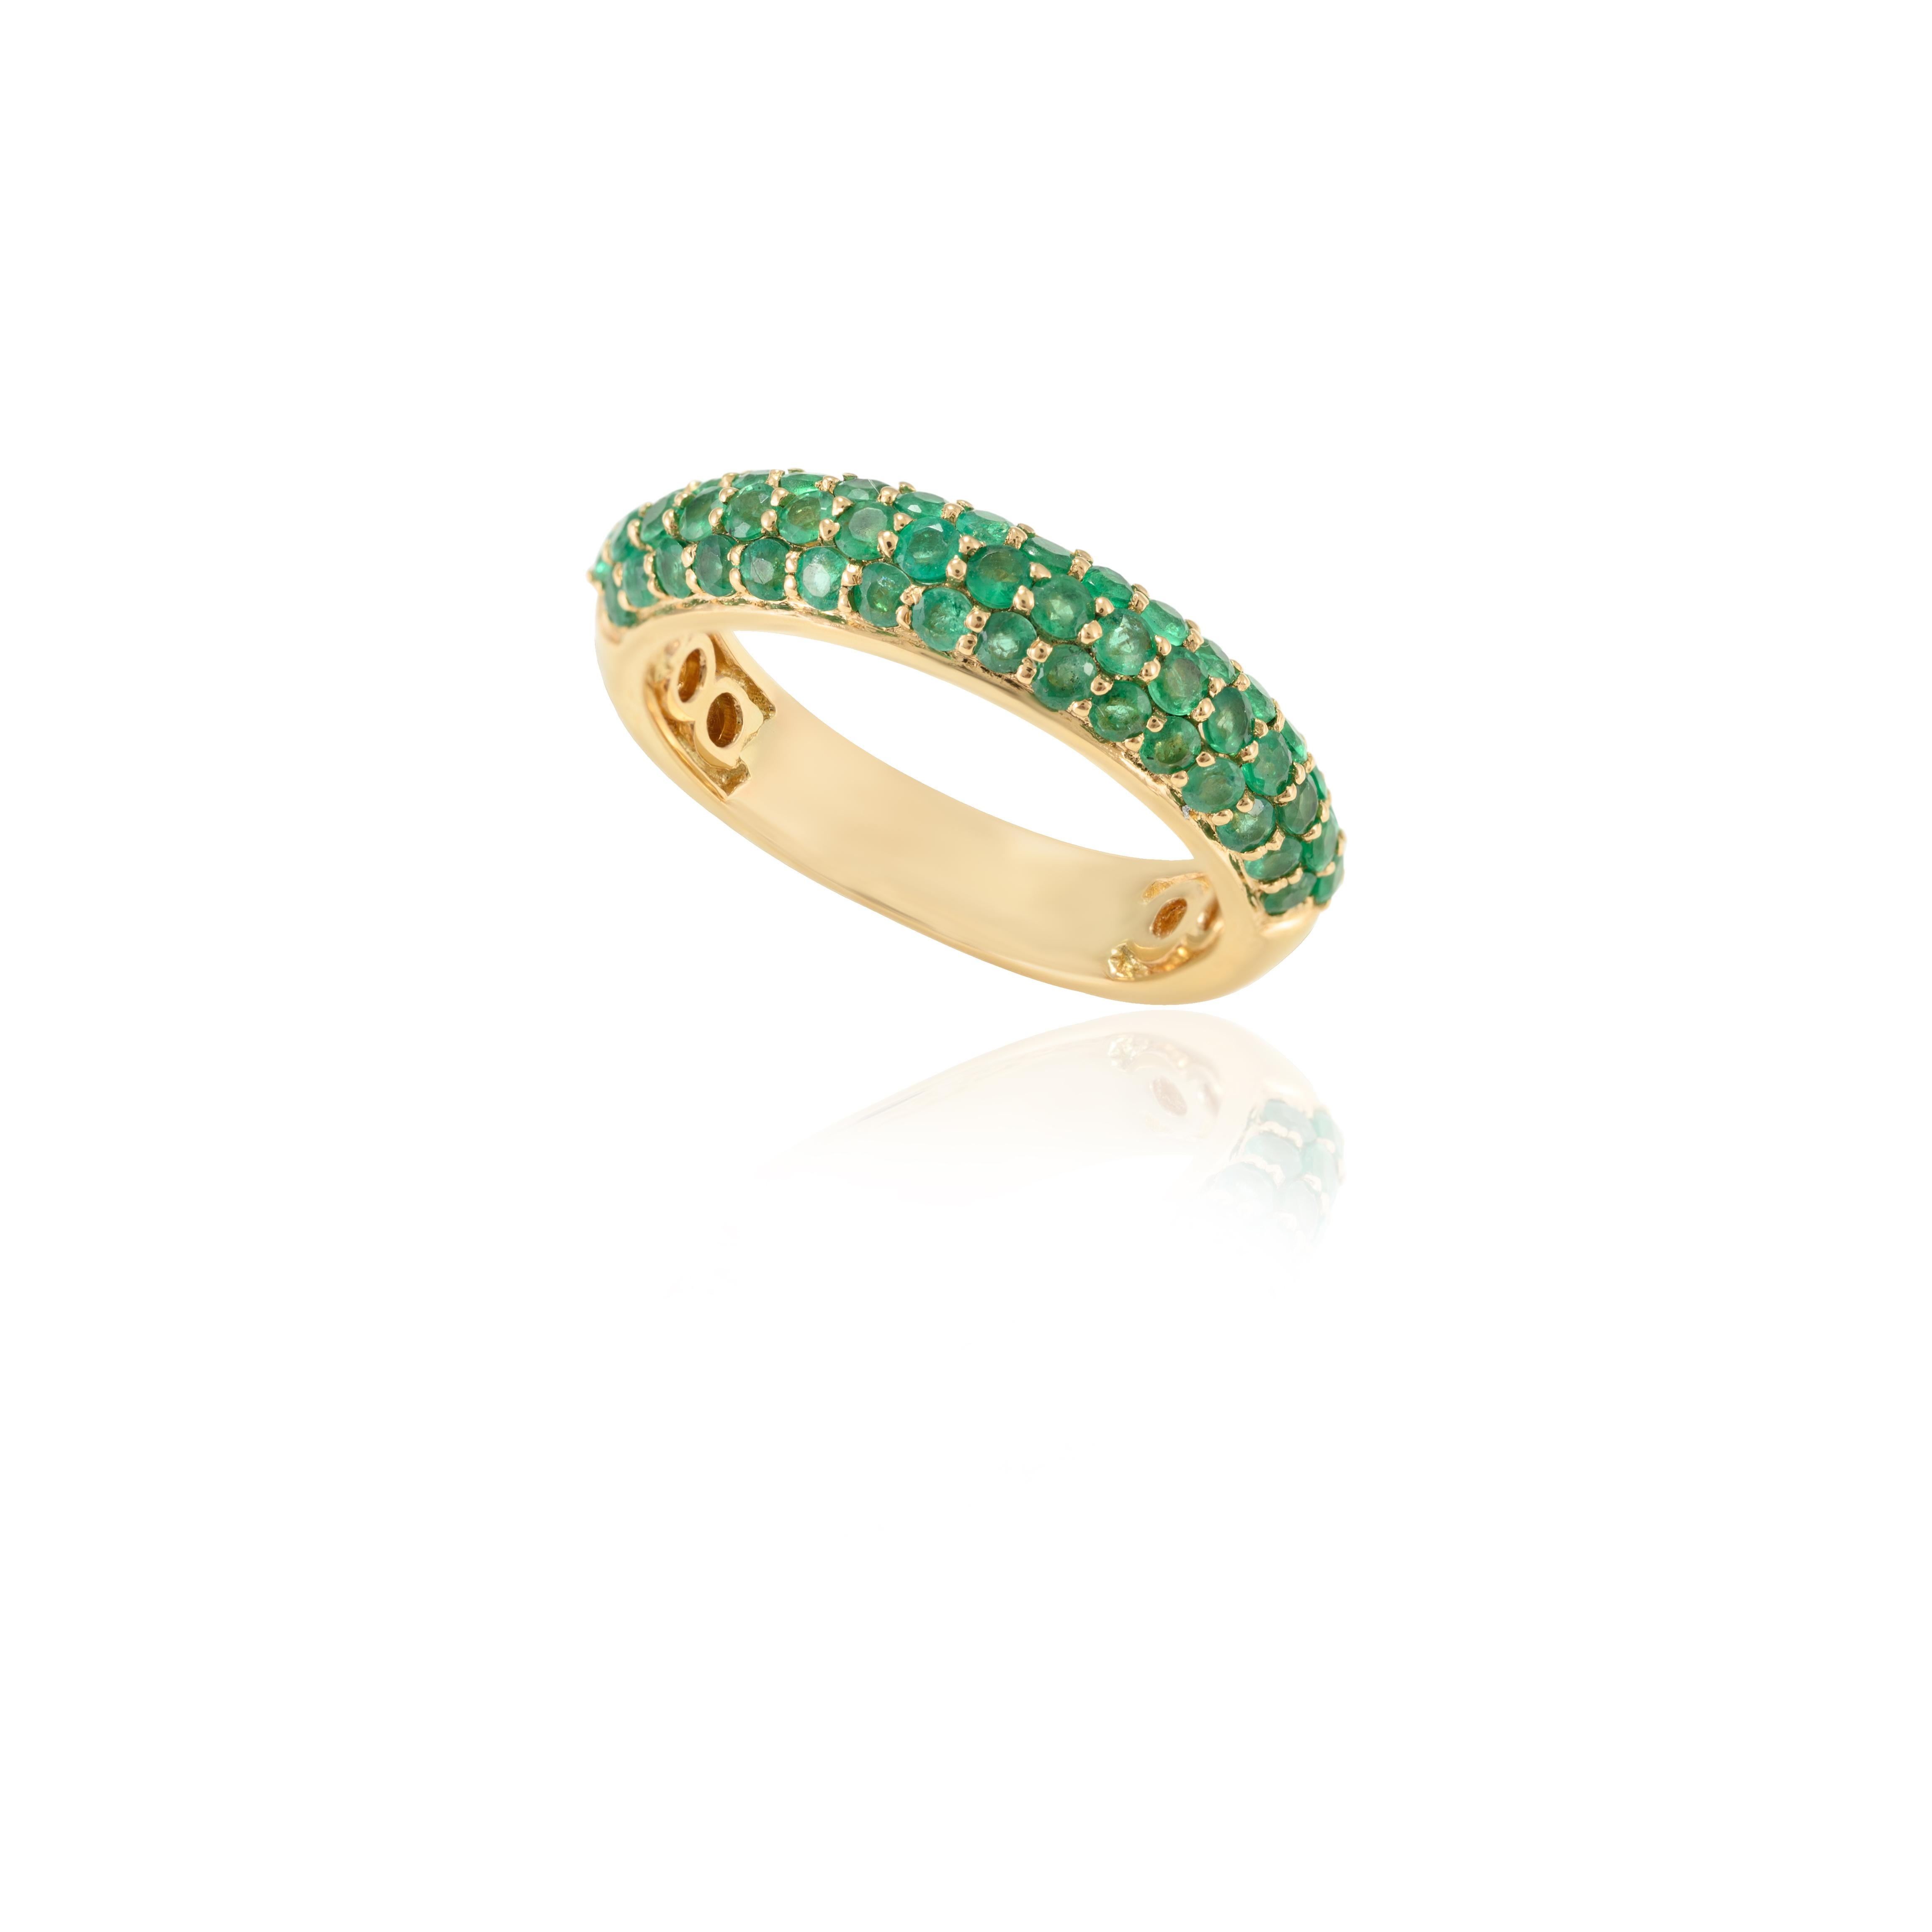 For Sale:  Natural Round Emerald Half Eternity Band Ring Studded in 18k Solid Yellow Gold 7